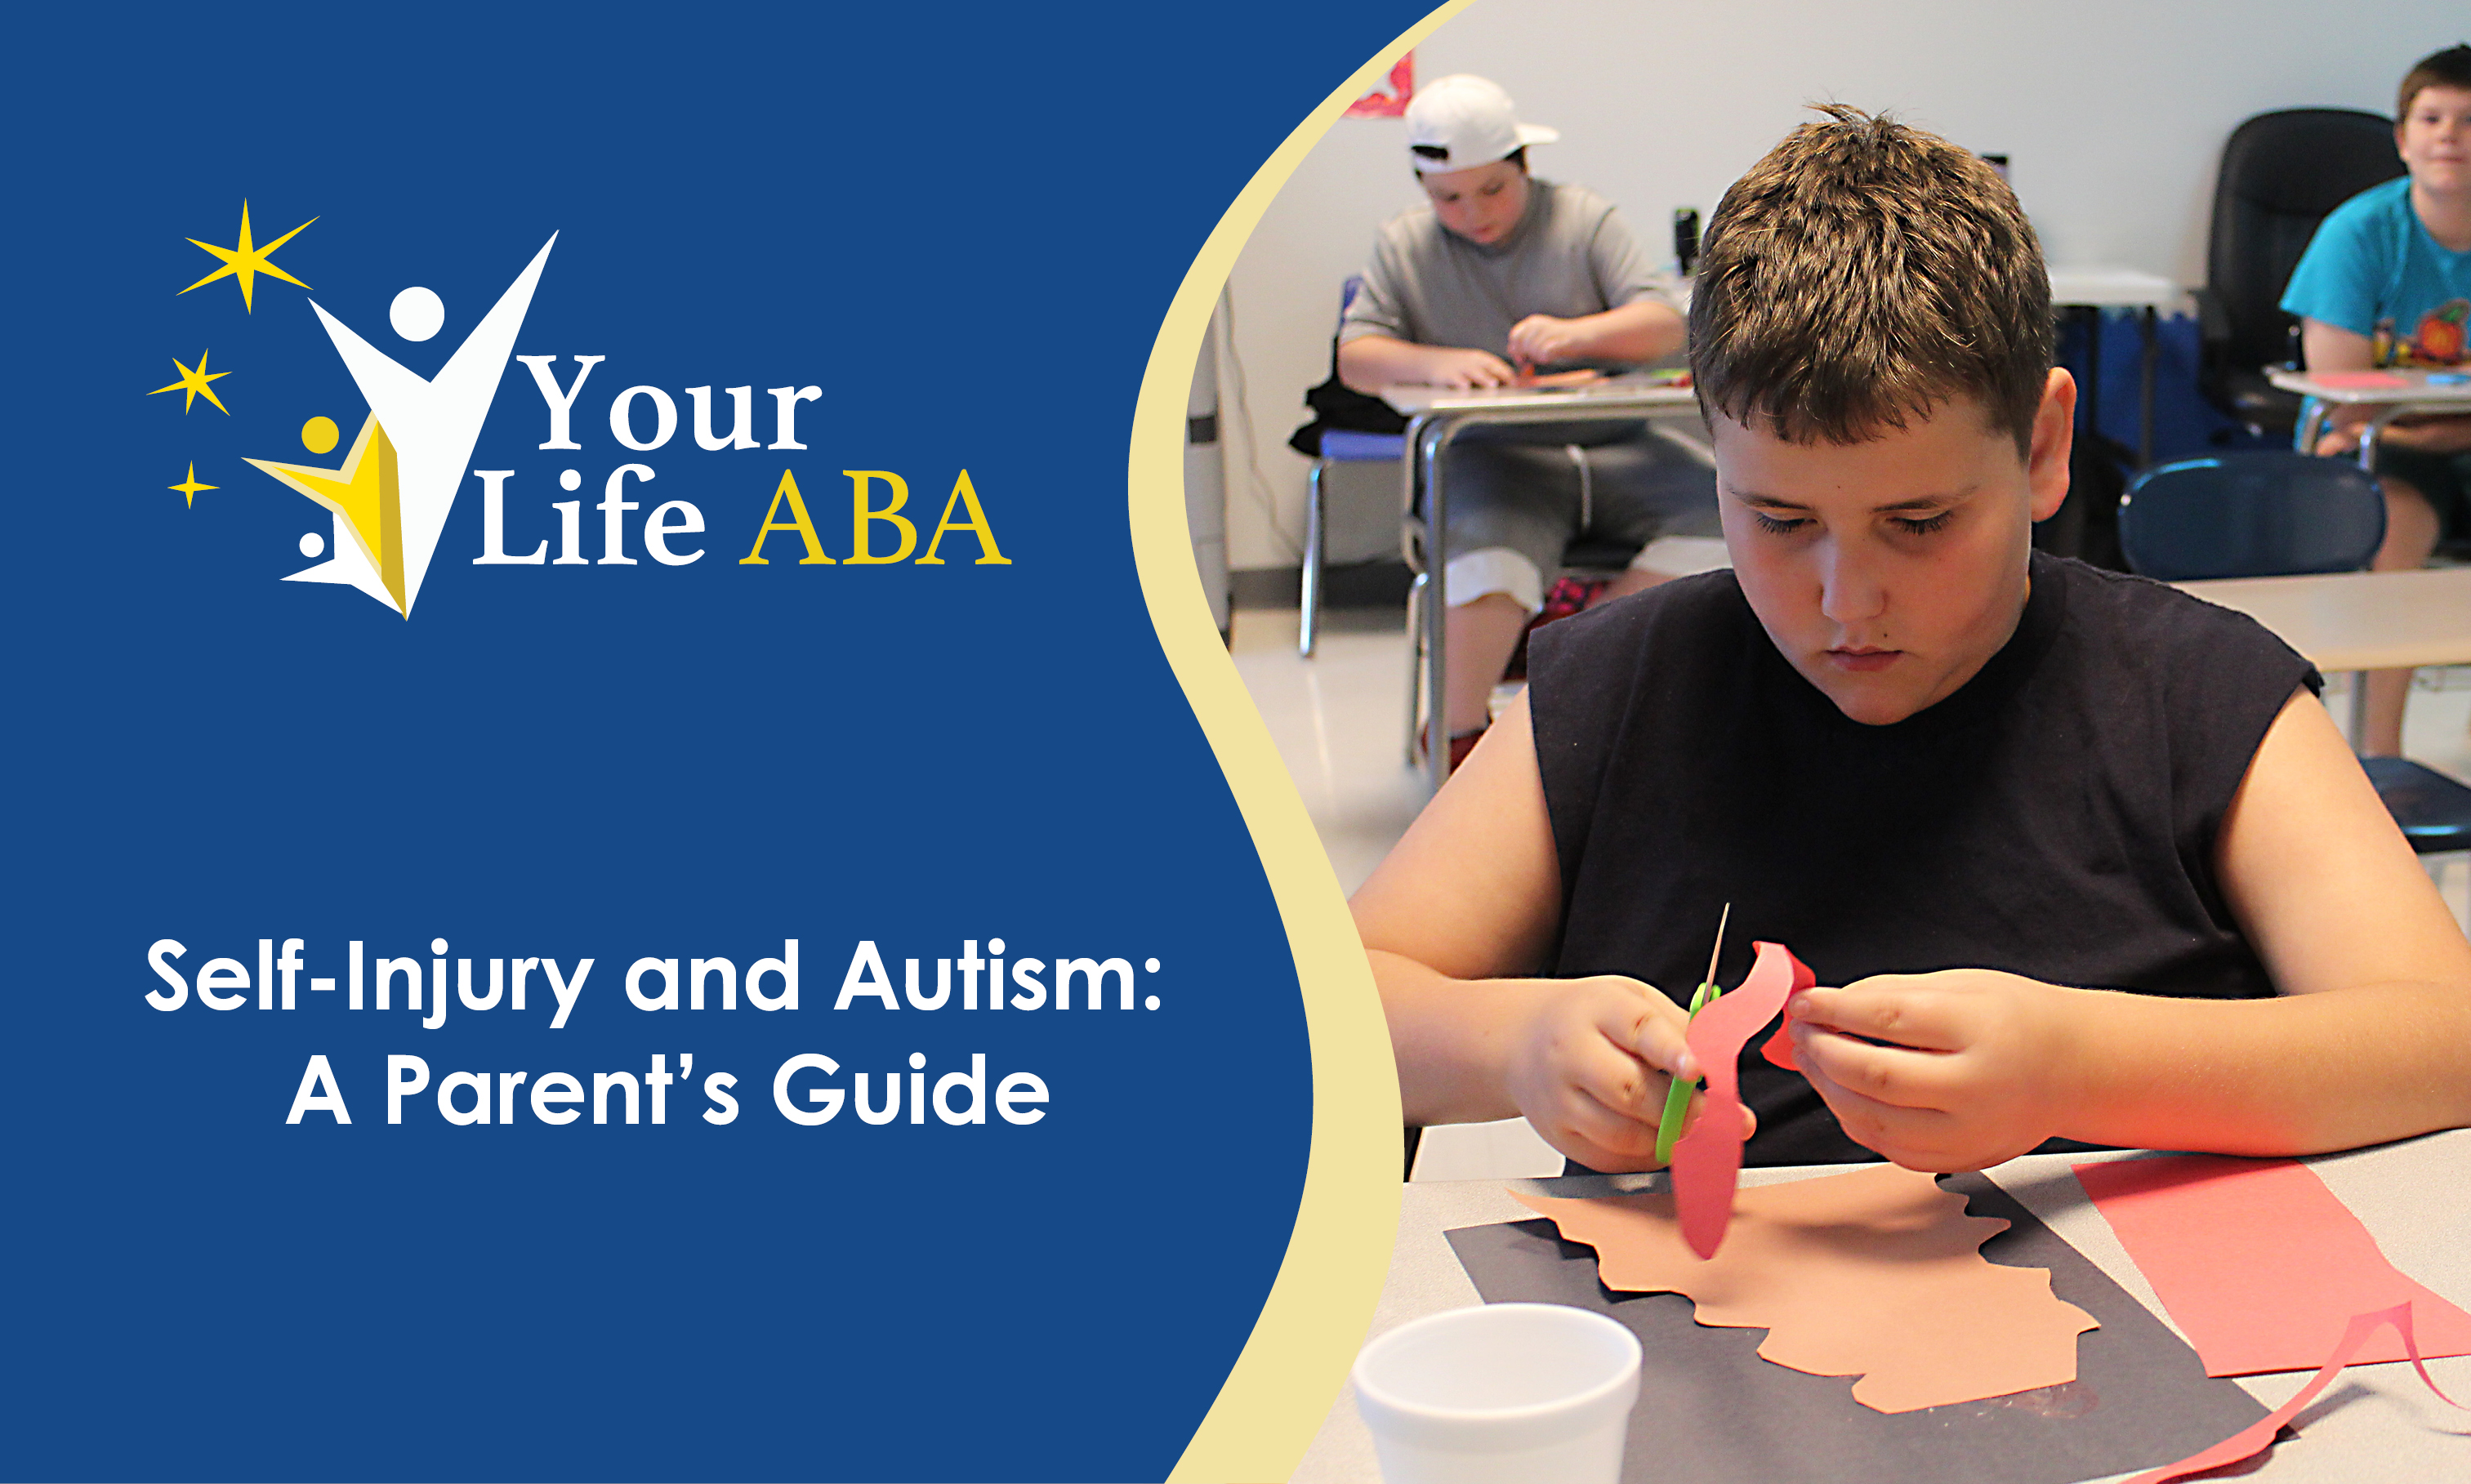 Self-Injury and Autism: A Parent’s Guide